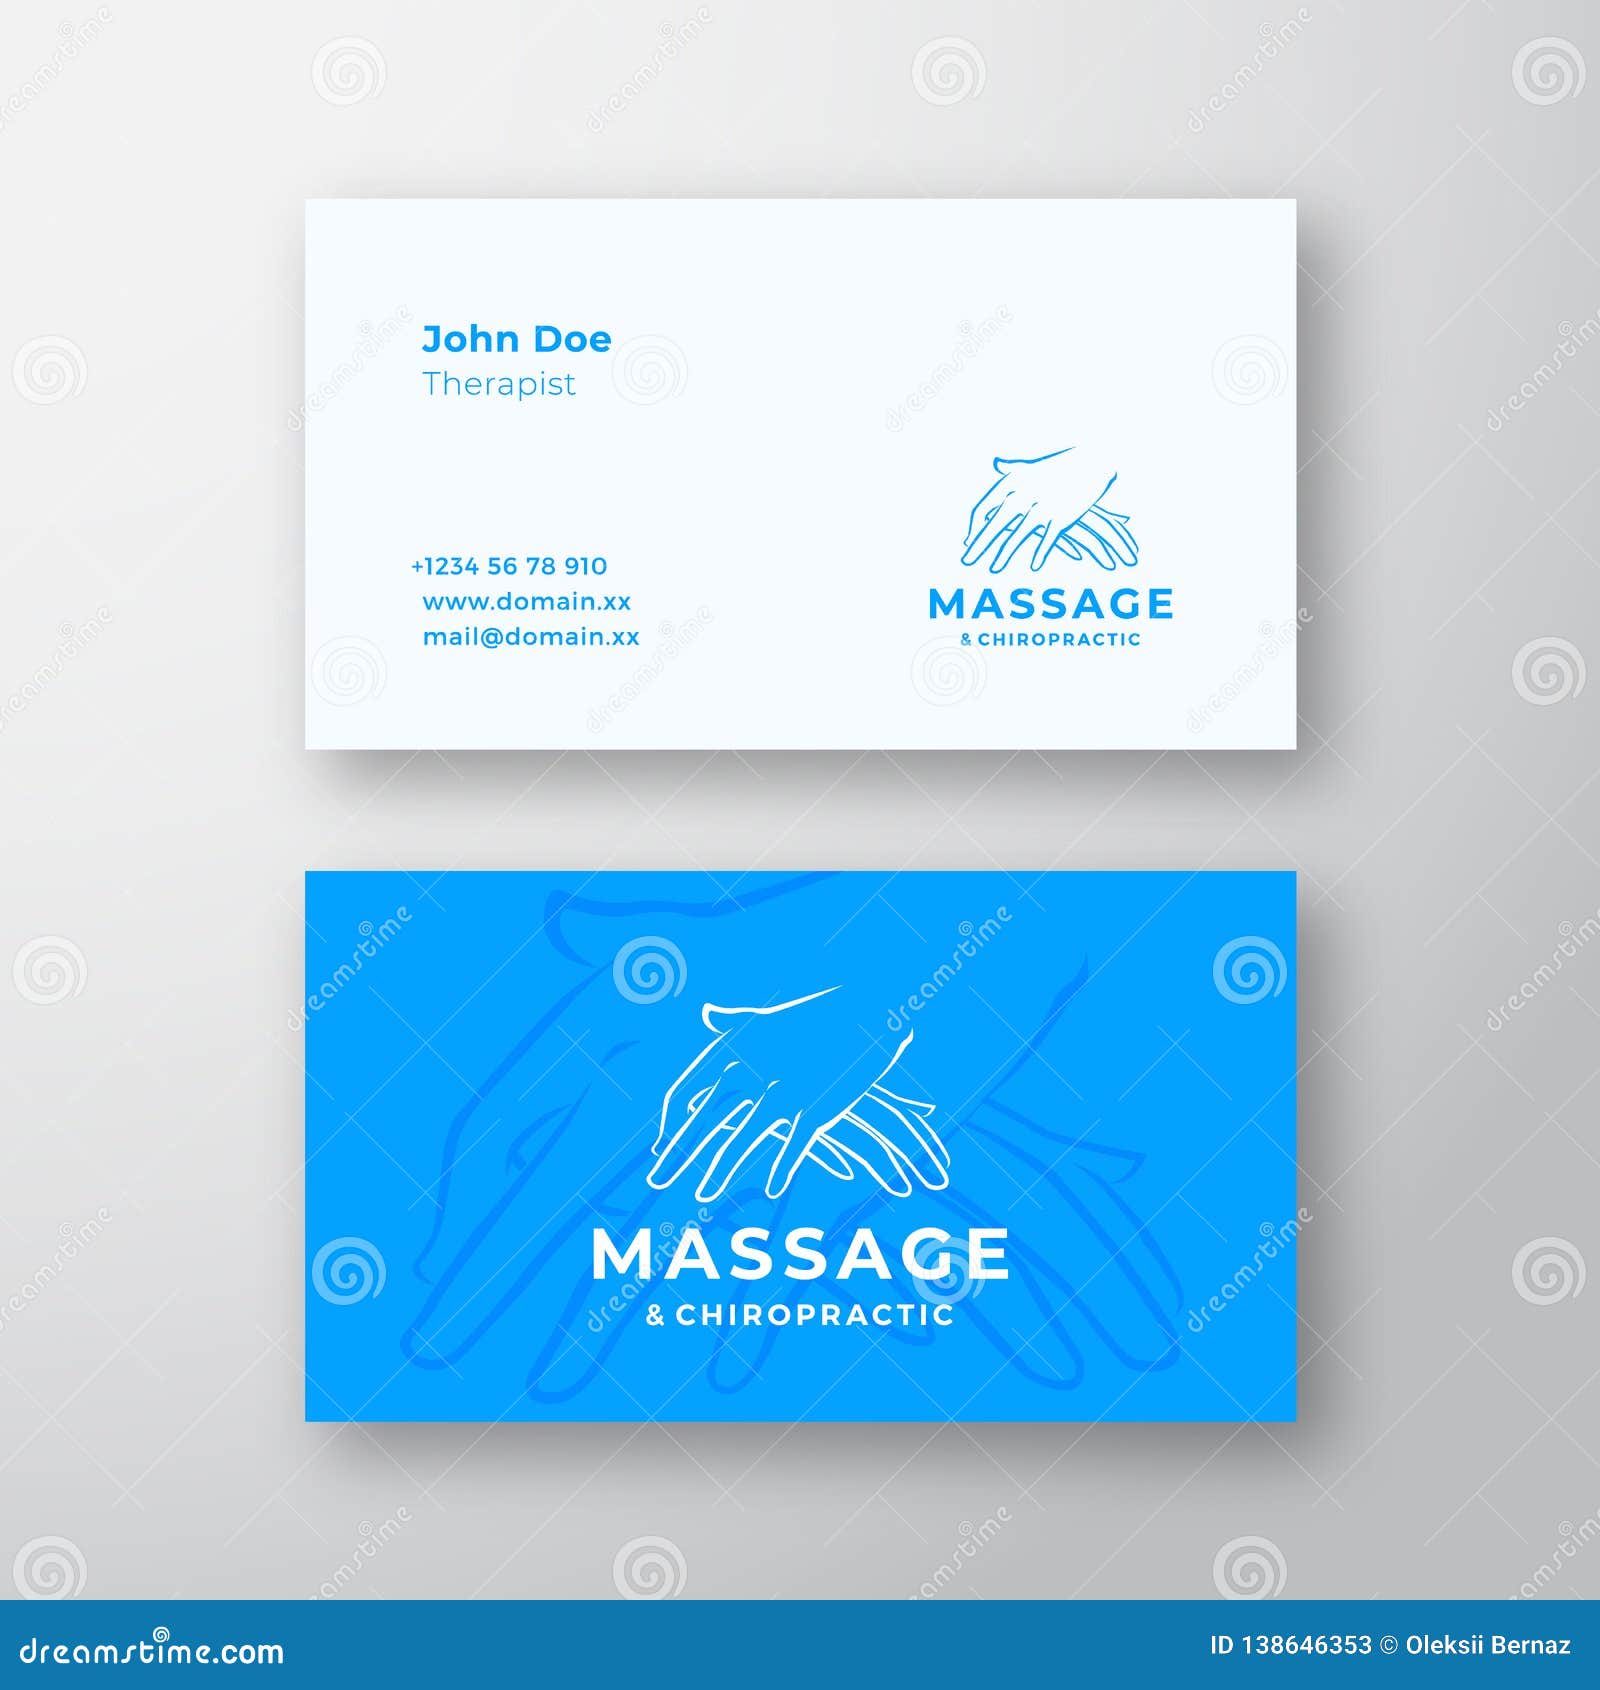 Massage and Chiropractic Abstract Vector Logo and Business Card With Chiropractic Travel Card Template